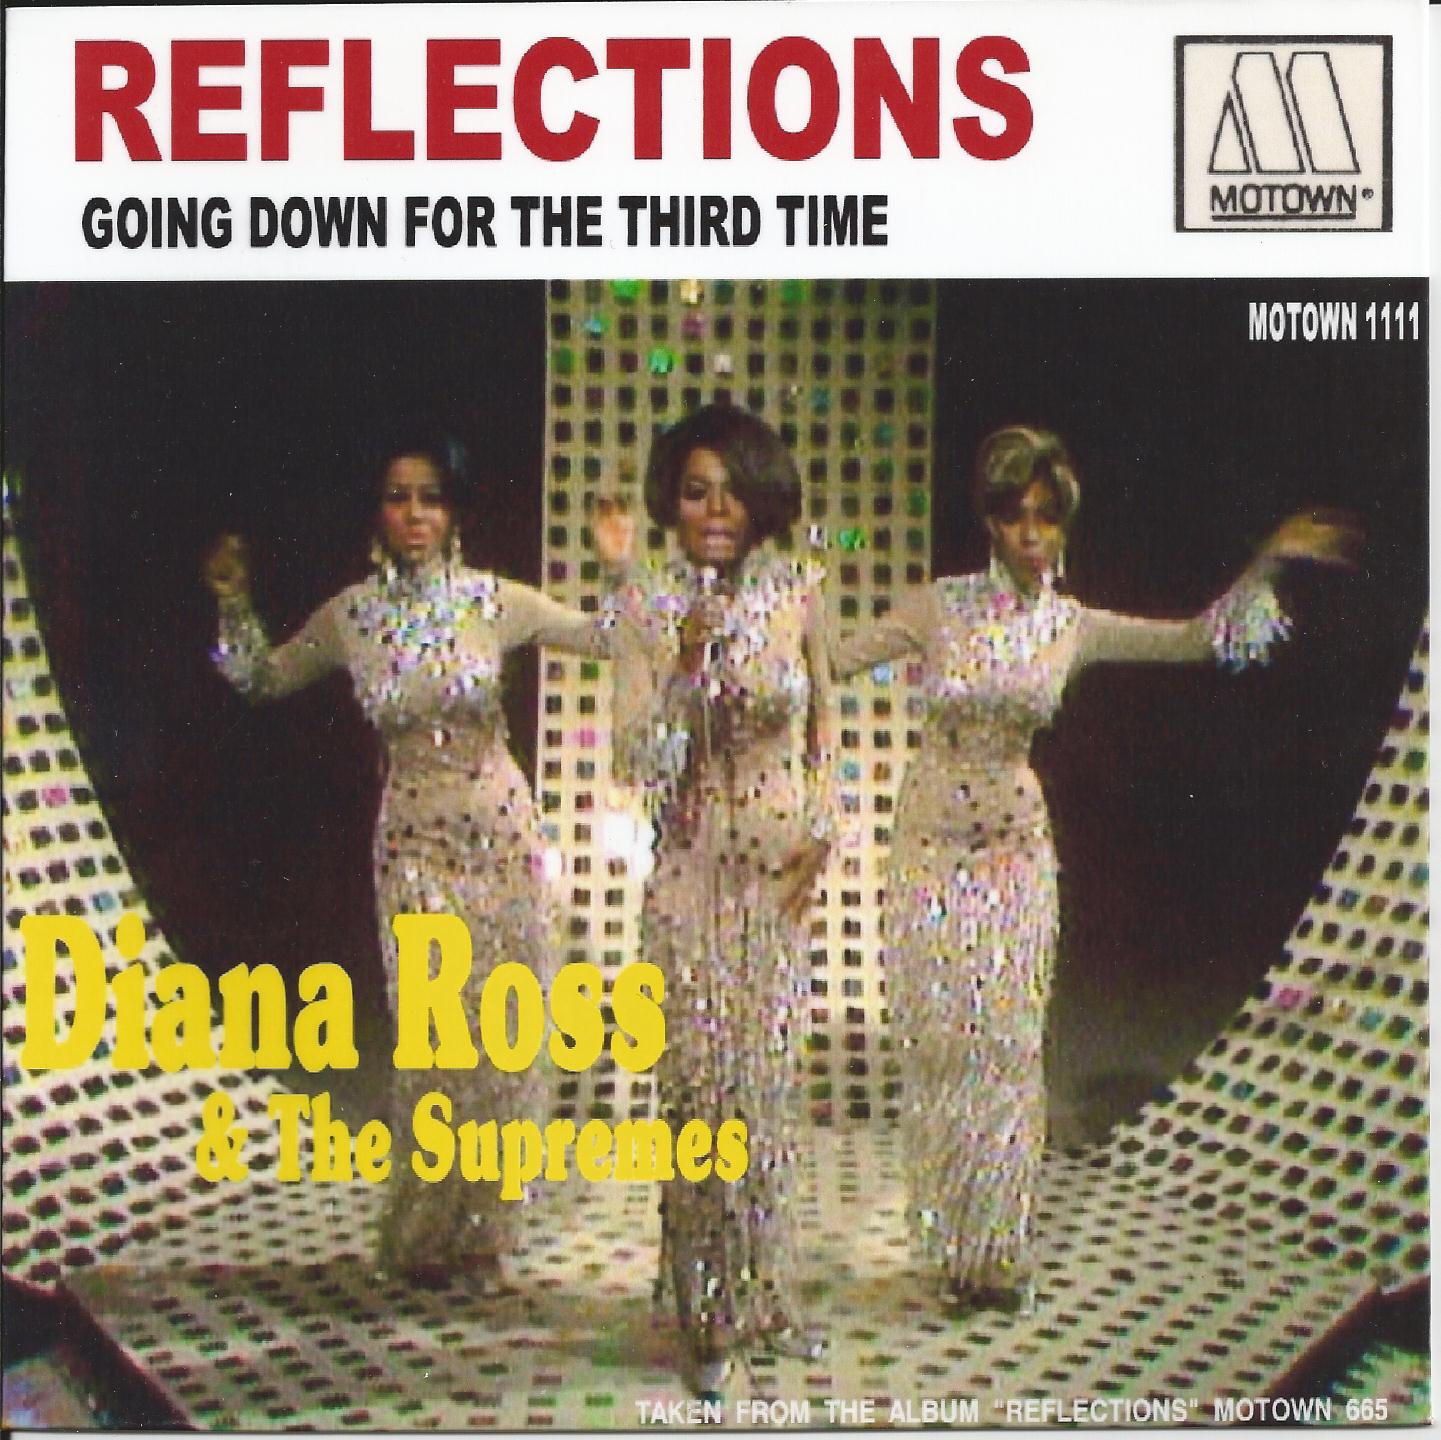 Diana Ross and the Supremes Album Covers